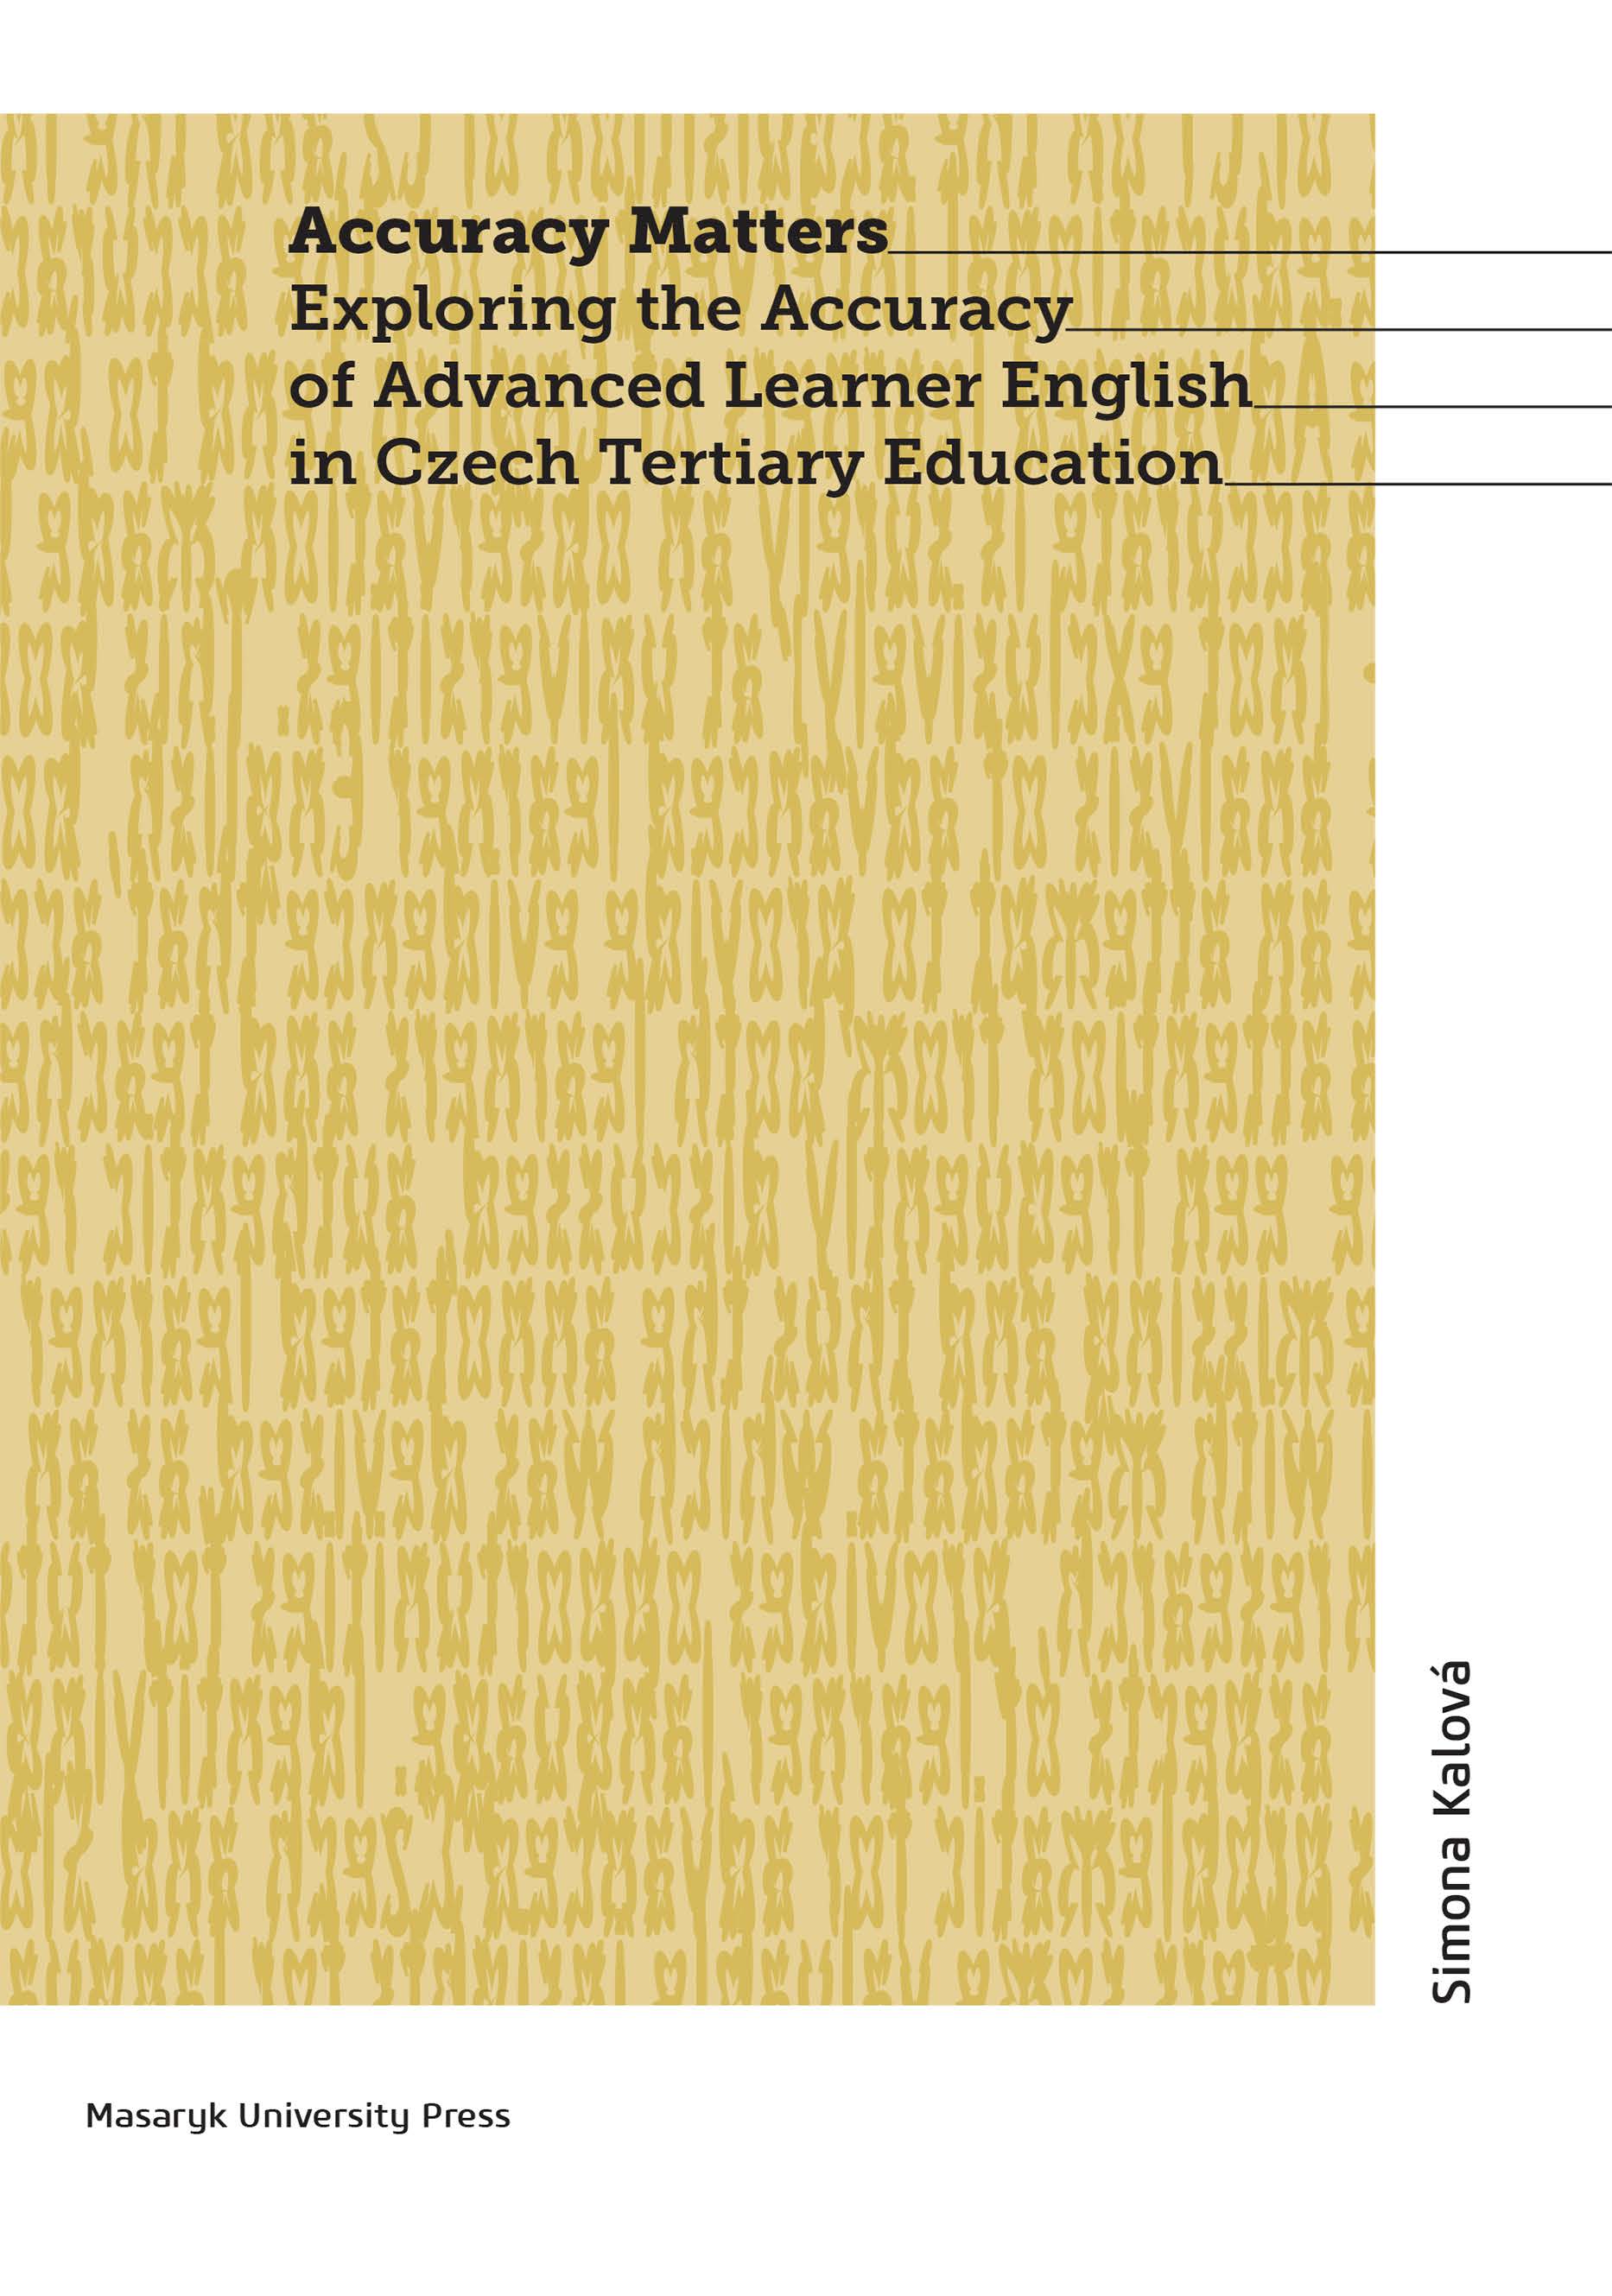 Obálka pro Accuracy Matters. Exploring the Accuracy of Advanced Learner English in Czech Tertiary Education